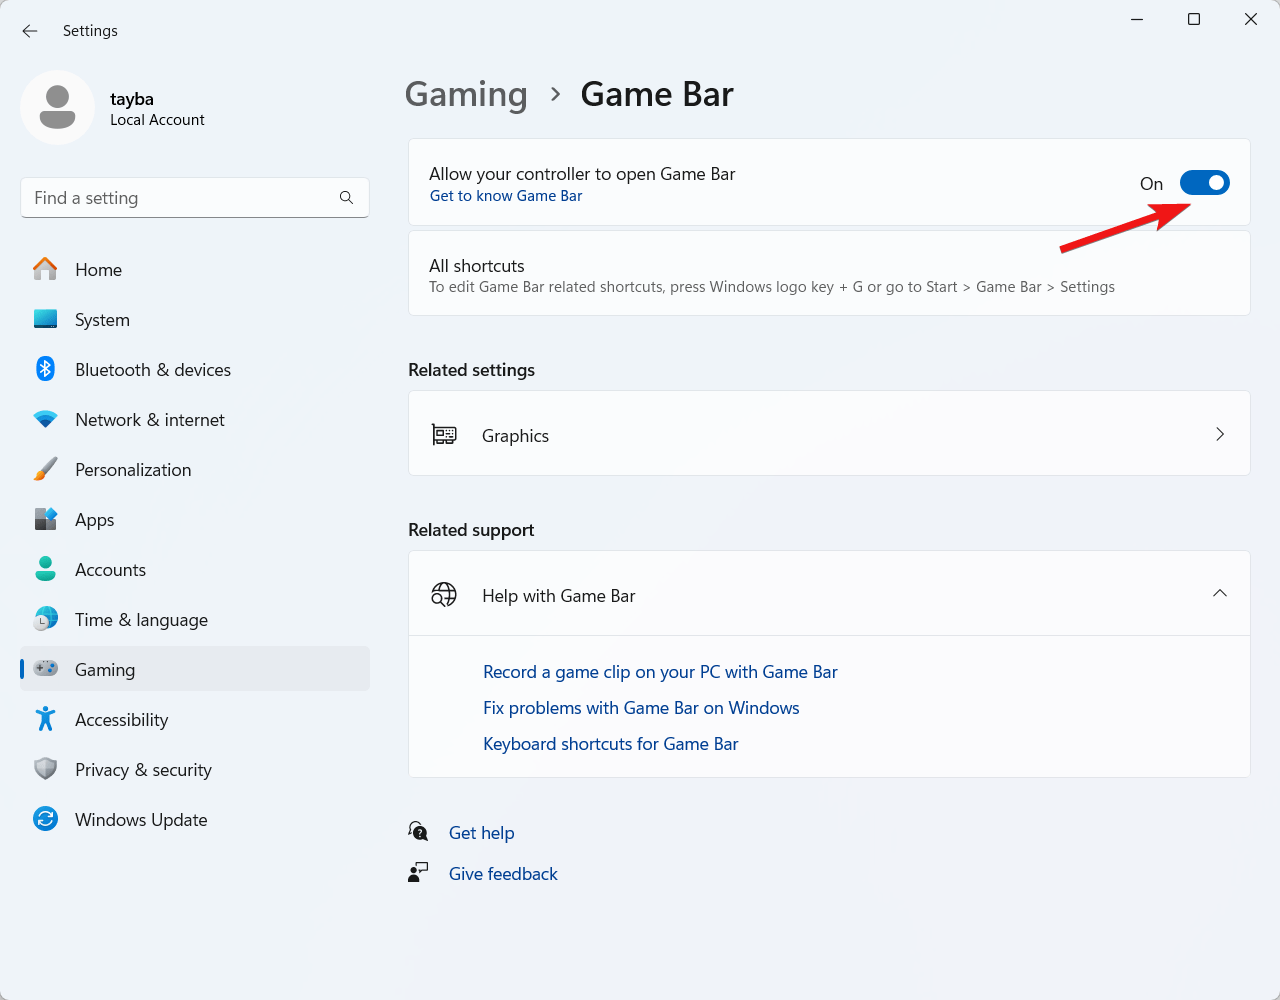 Enable-the-toggle-for-allow-your-controller-to-open-Game-Bar